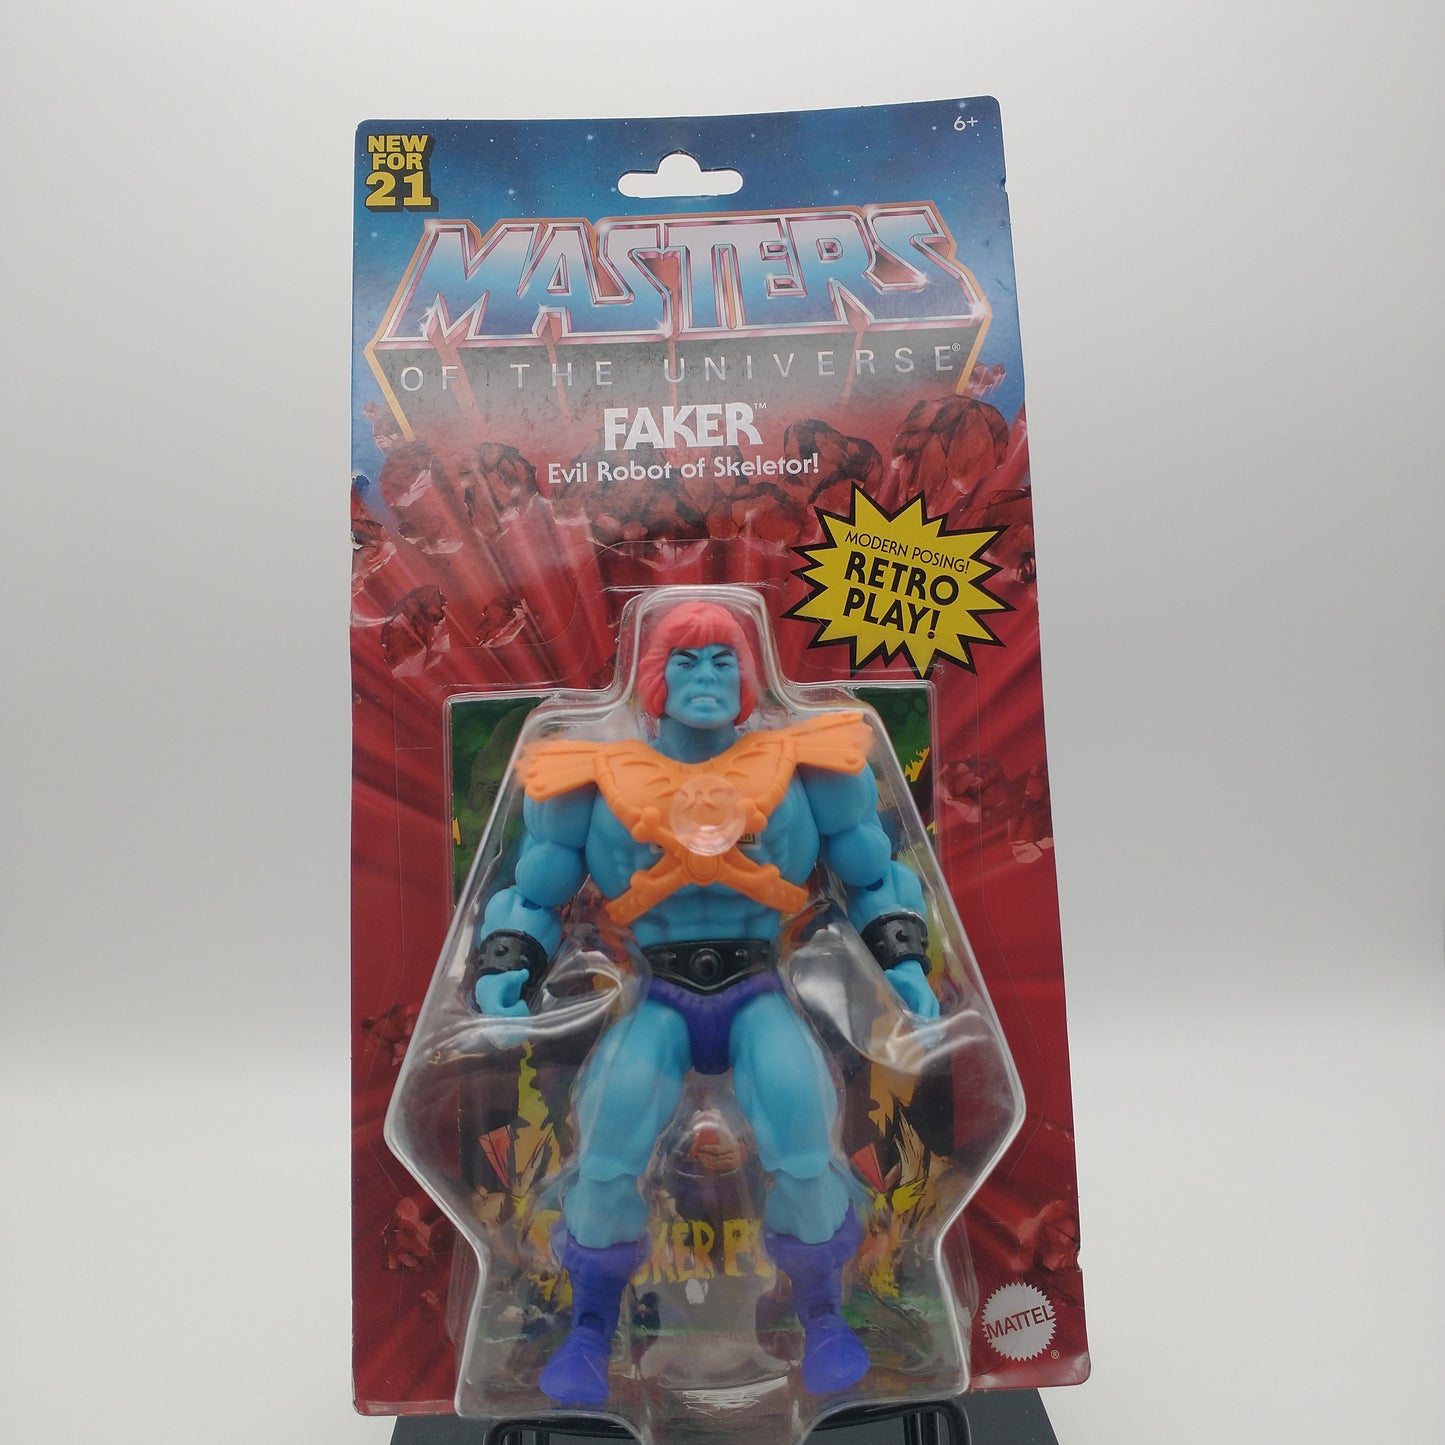 The front of the box and bubble. The bubble is sealed, the action figure inside is a blue man with red hair. He's wearing an orange chestplate and a dark blue speedo.